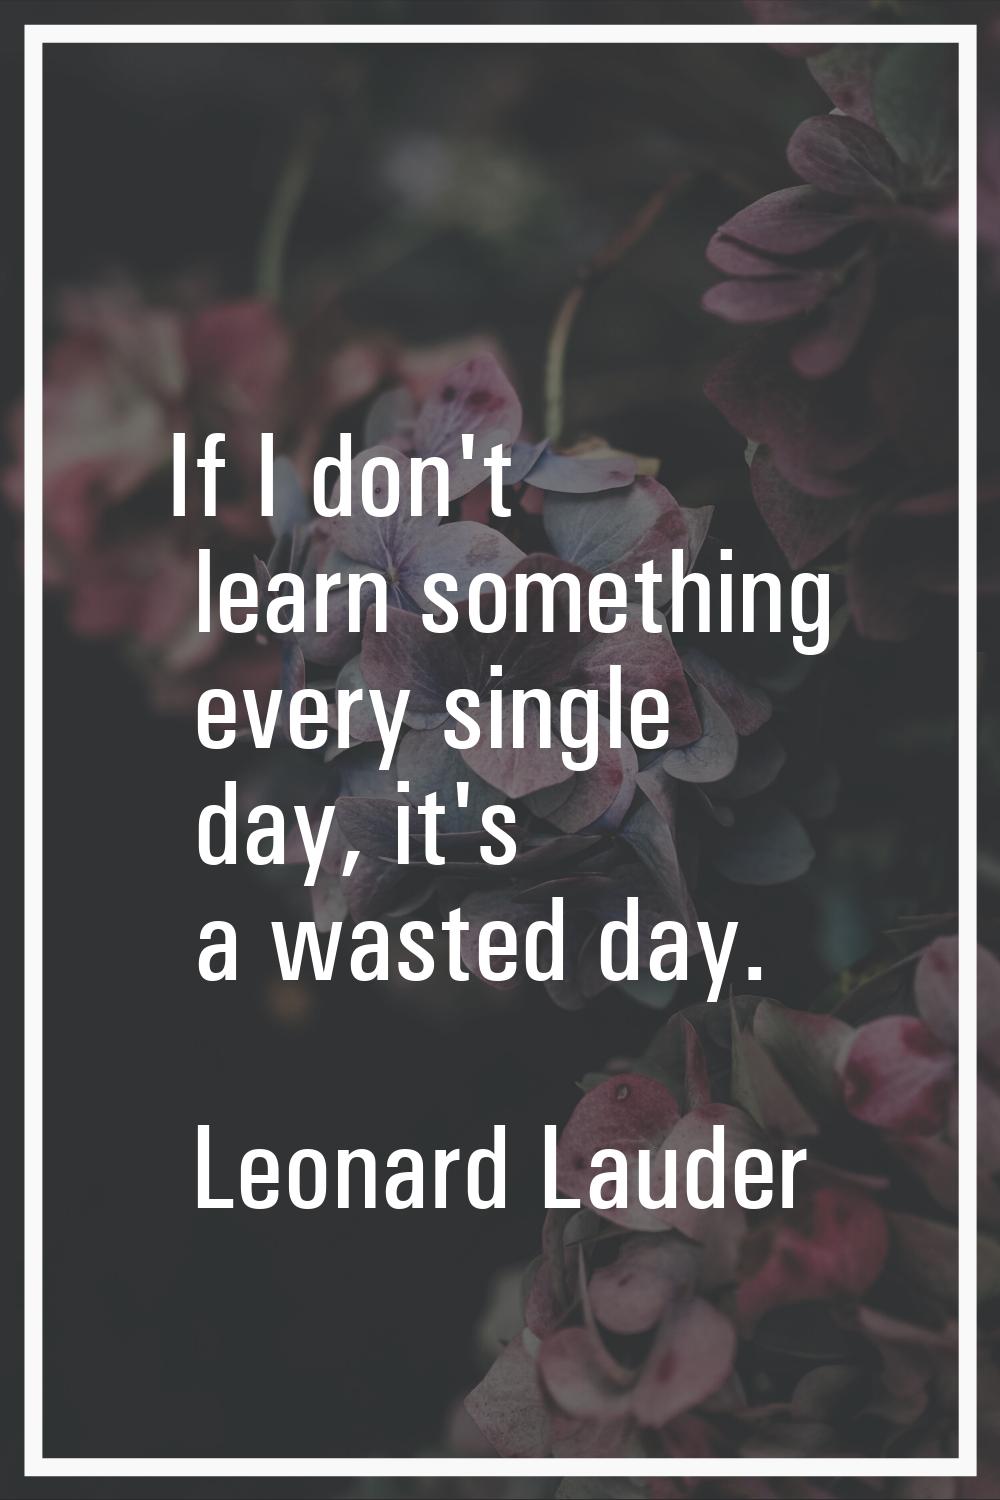 If I don't learn something every single day, it's a wasted day.